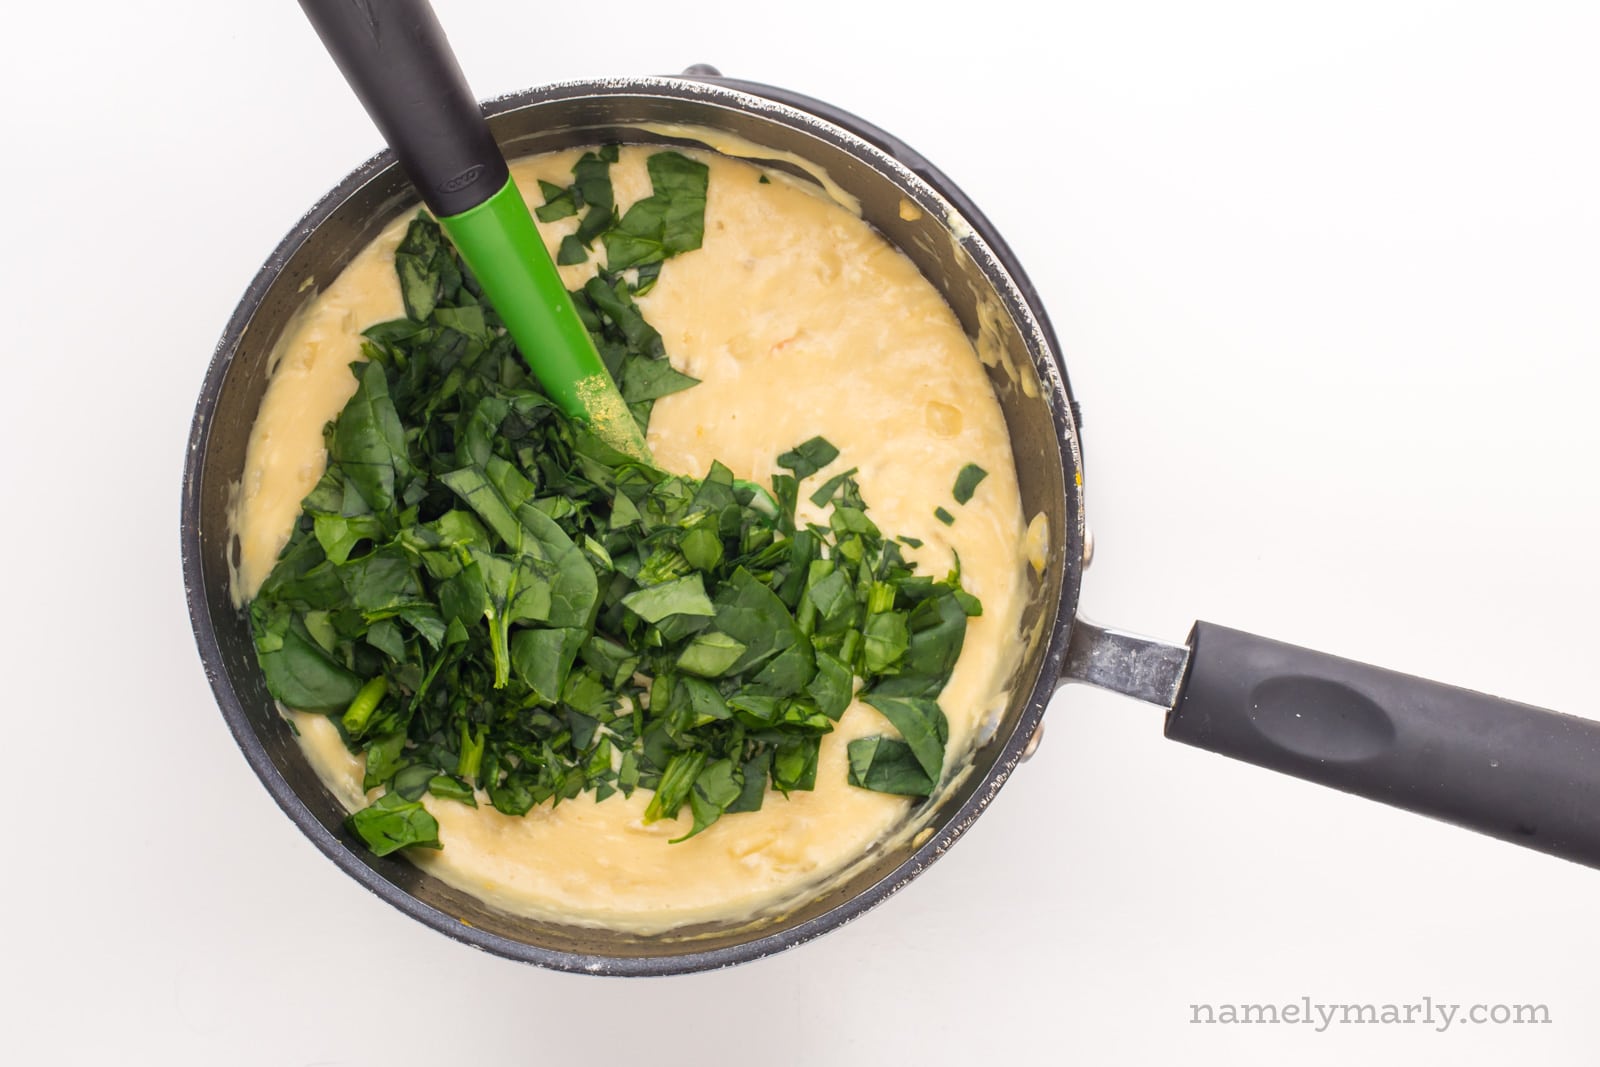 A saucepan shows the melted vegan cheese sauce with fresh spinach just added. A green spatula is in th epot, waiting to stir it all together.